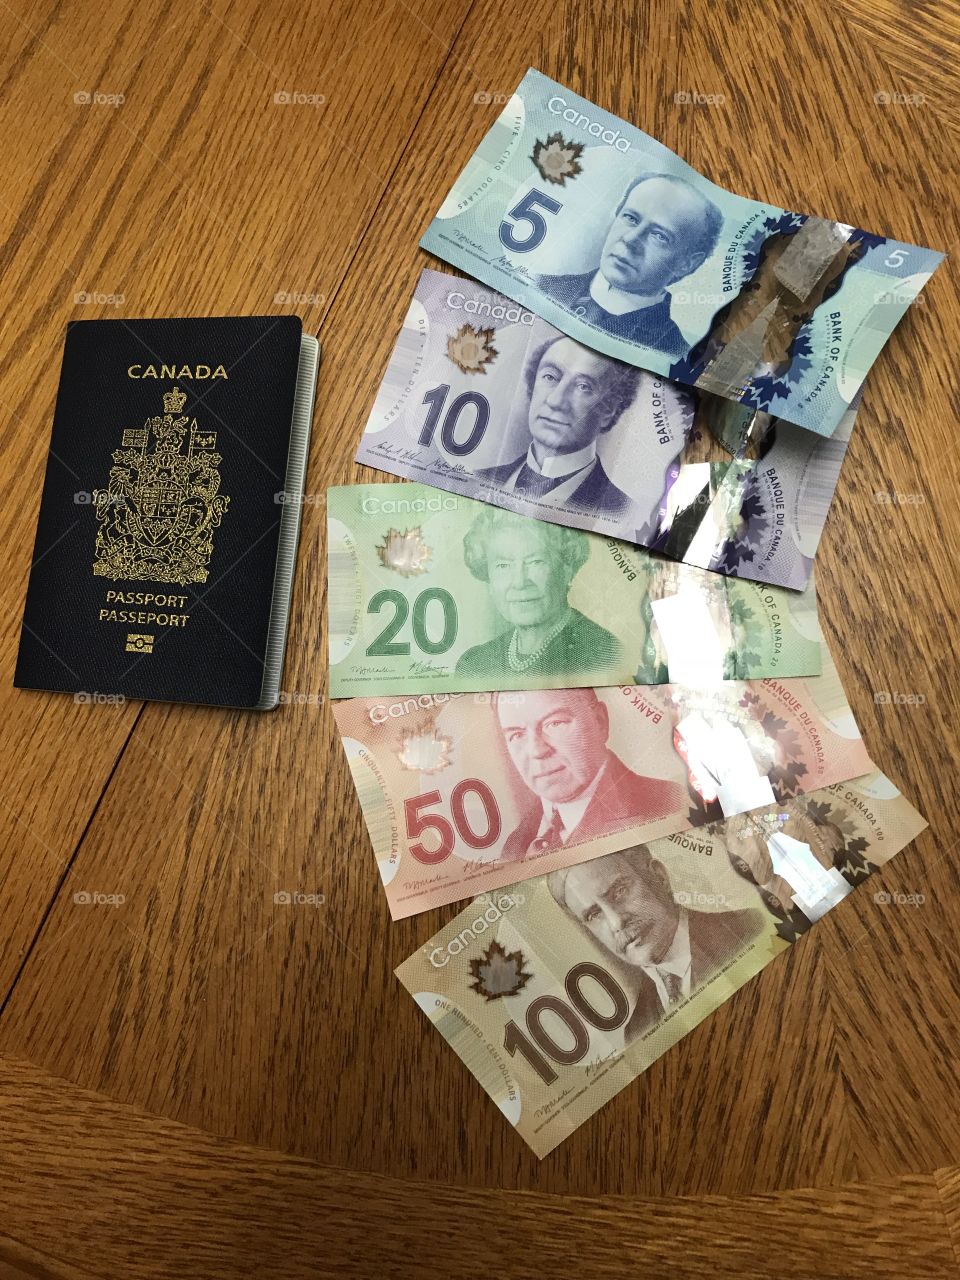 Canadian official passport and currency